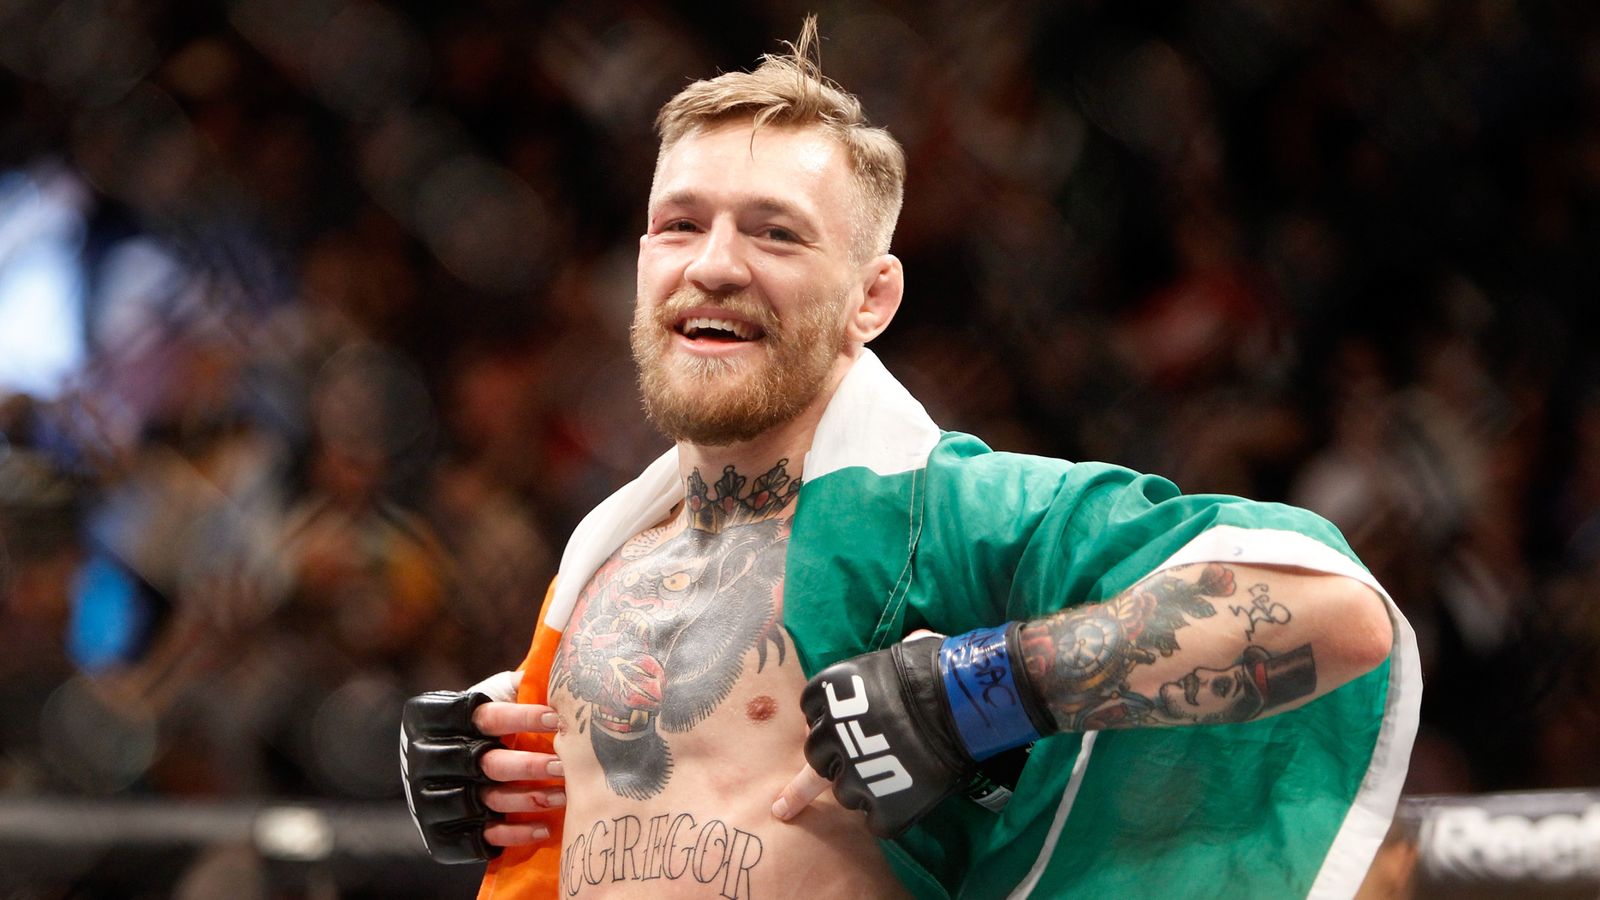 Conor McGregor knocked out Jose Aldo at UFC 194 to win the